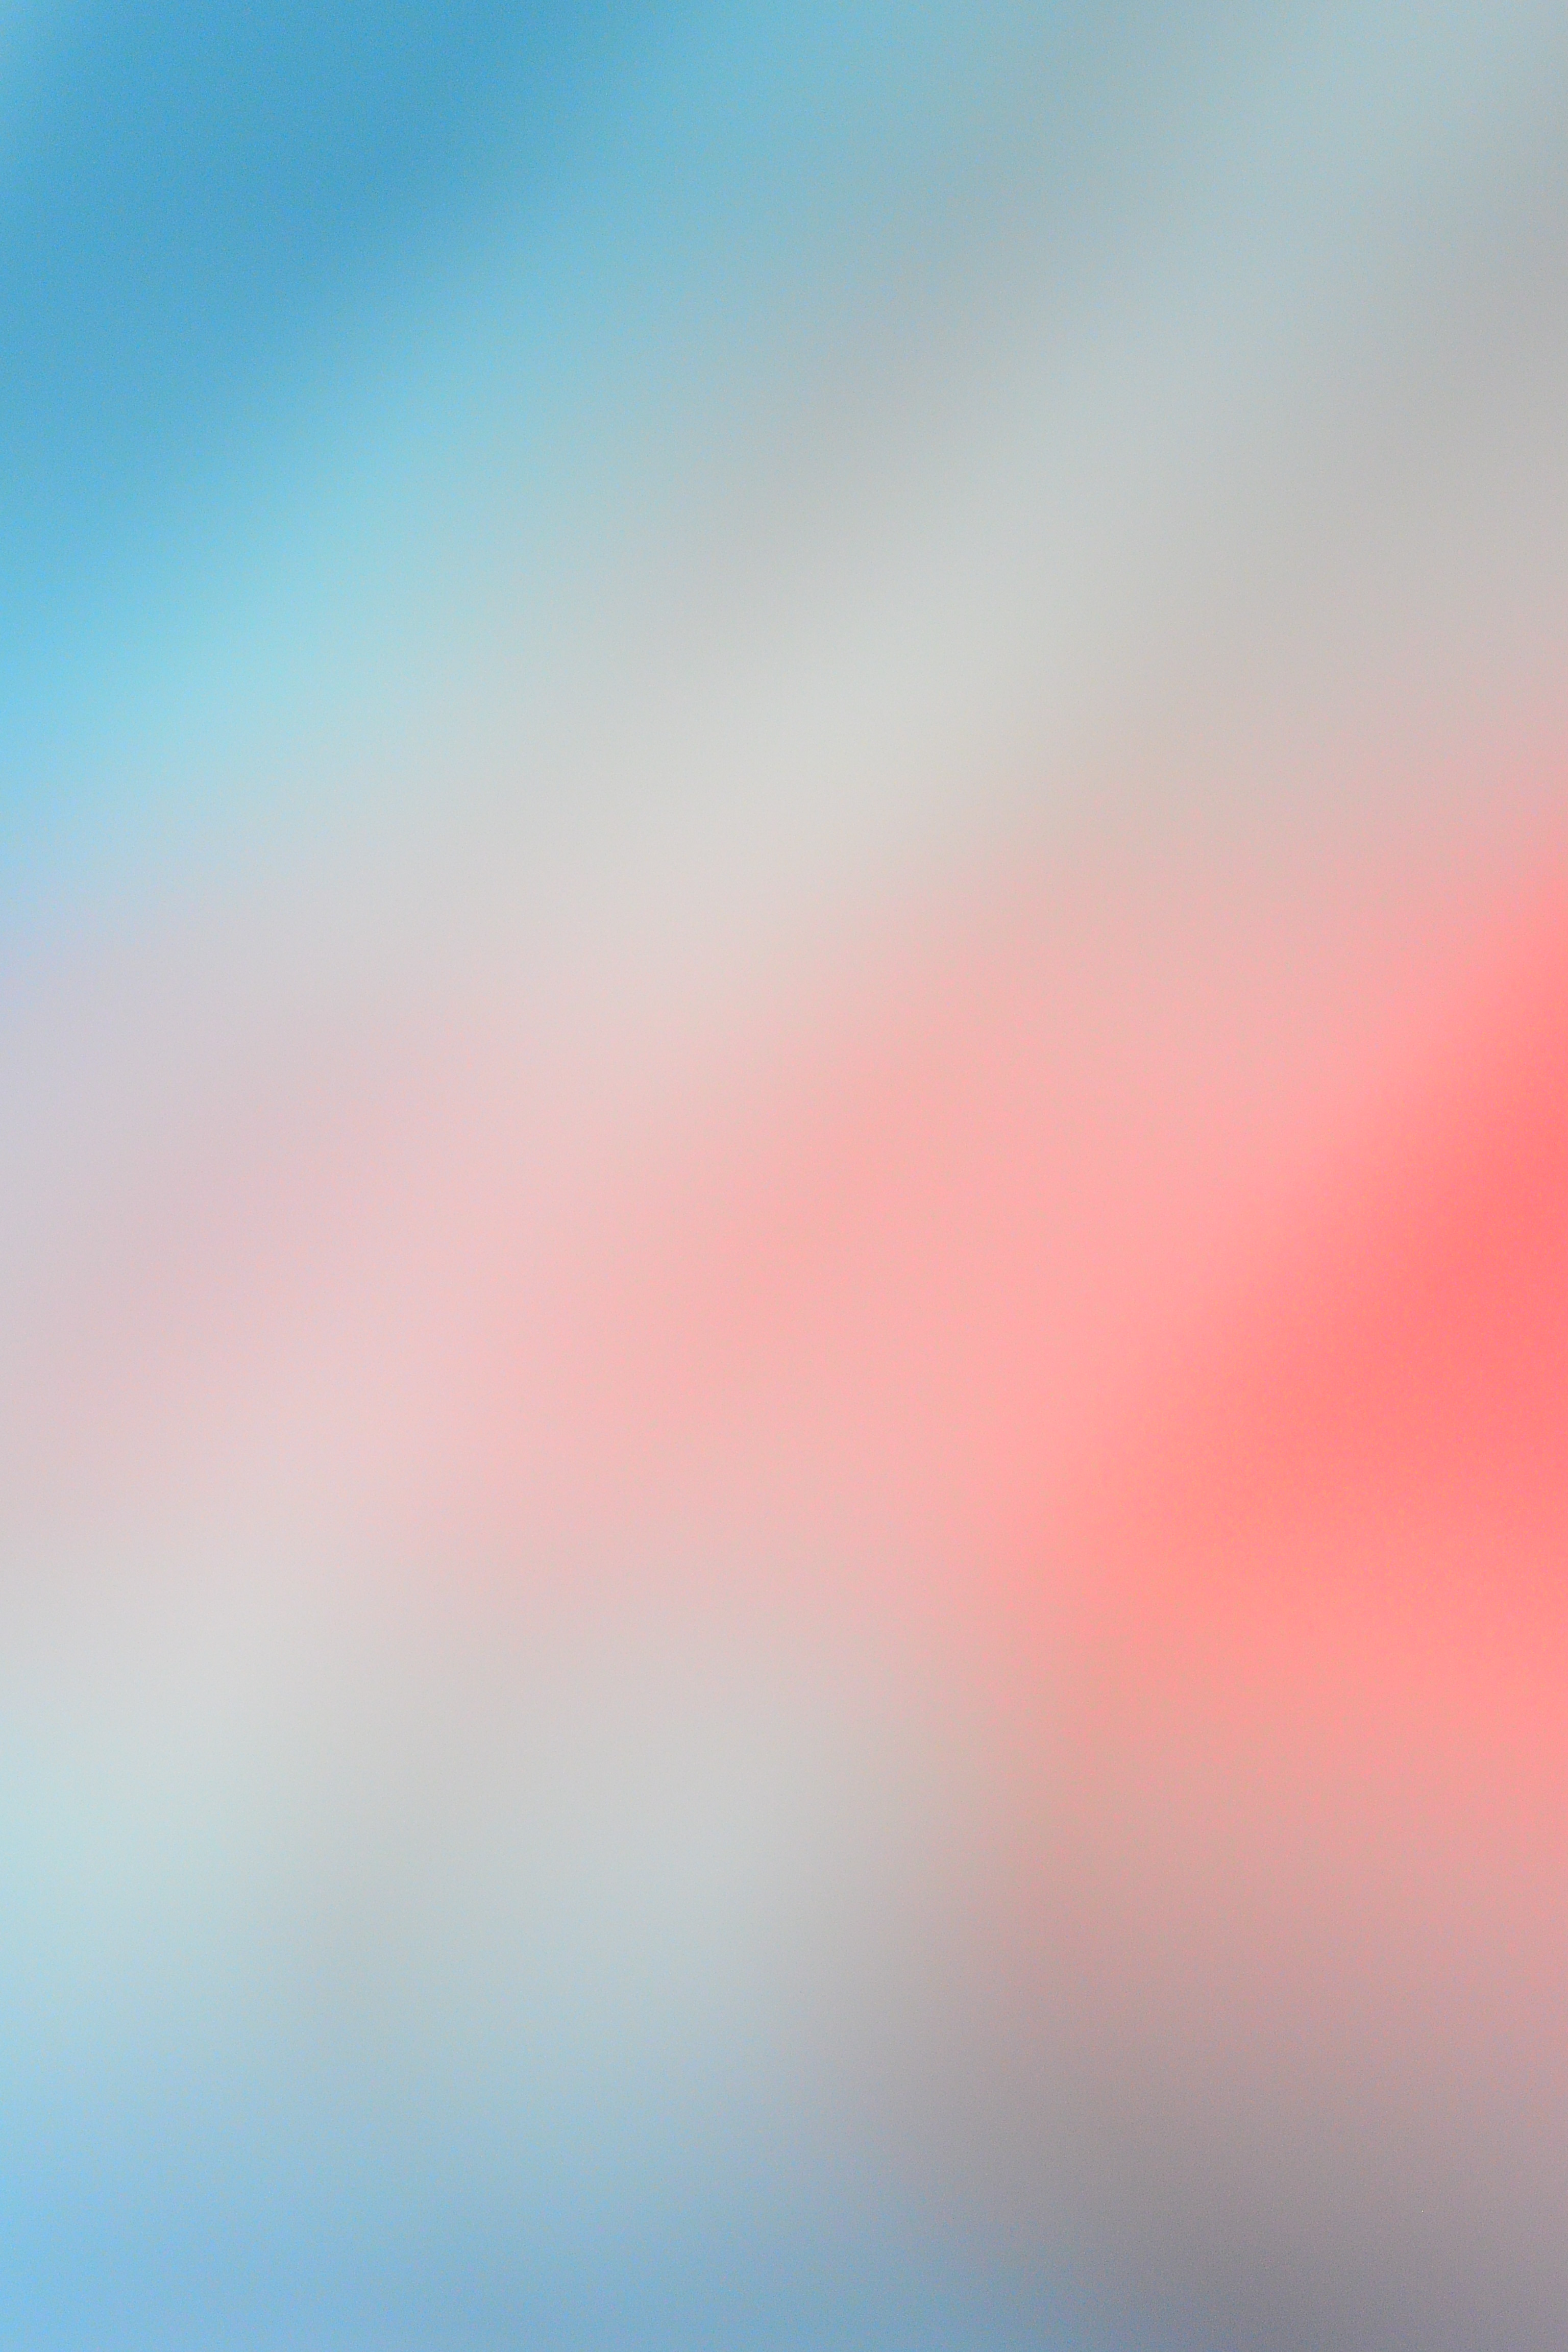 multicolored, blur, gradient, pink, abstract, blue, motley, smooth Phone Background